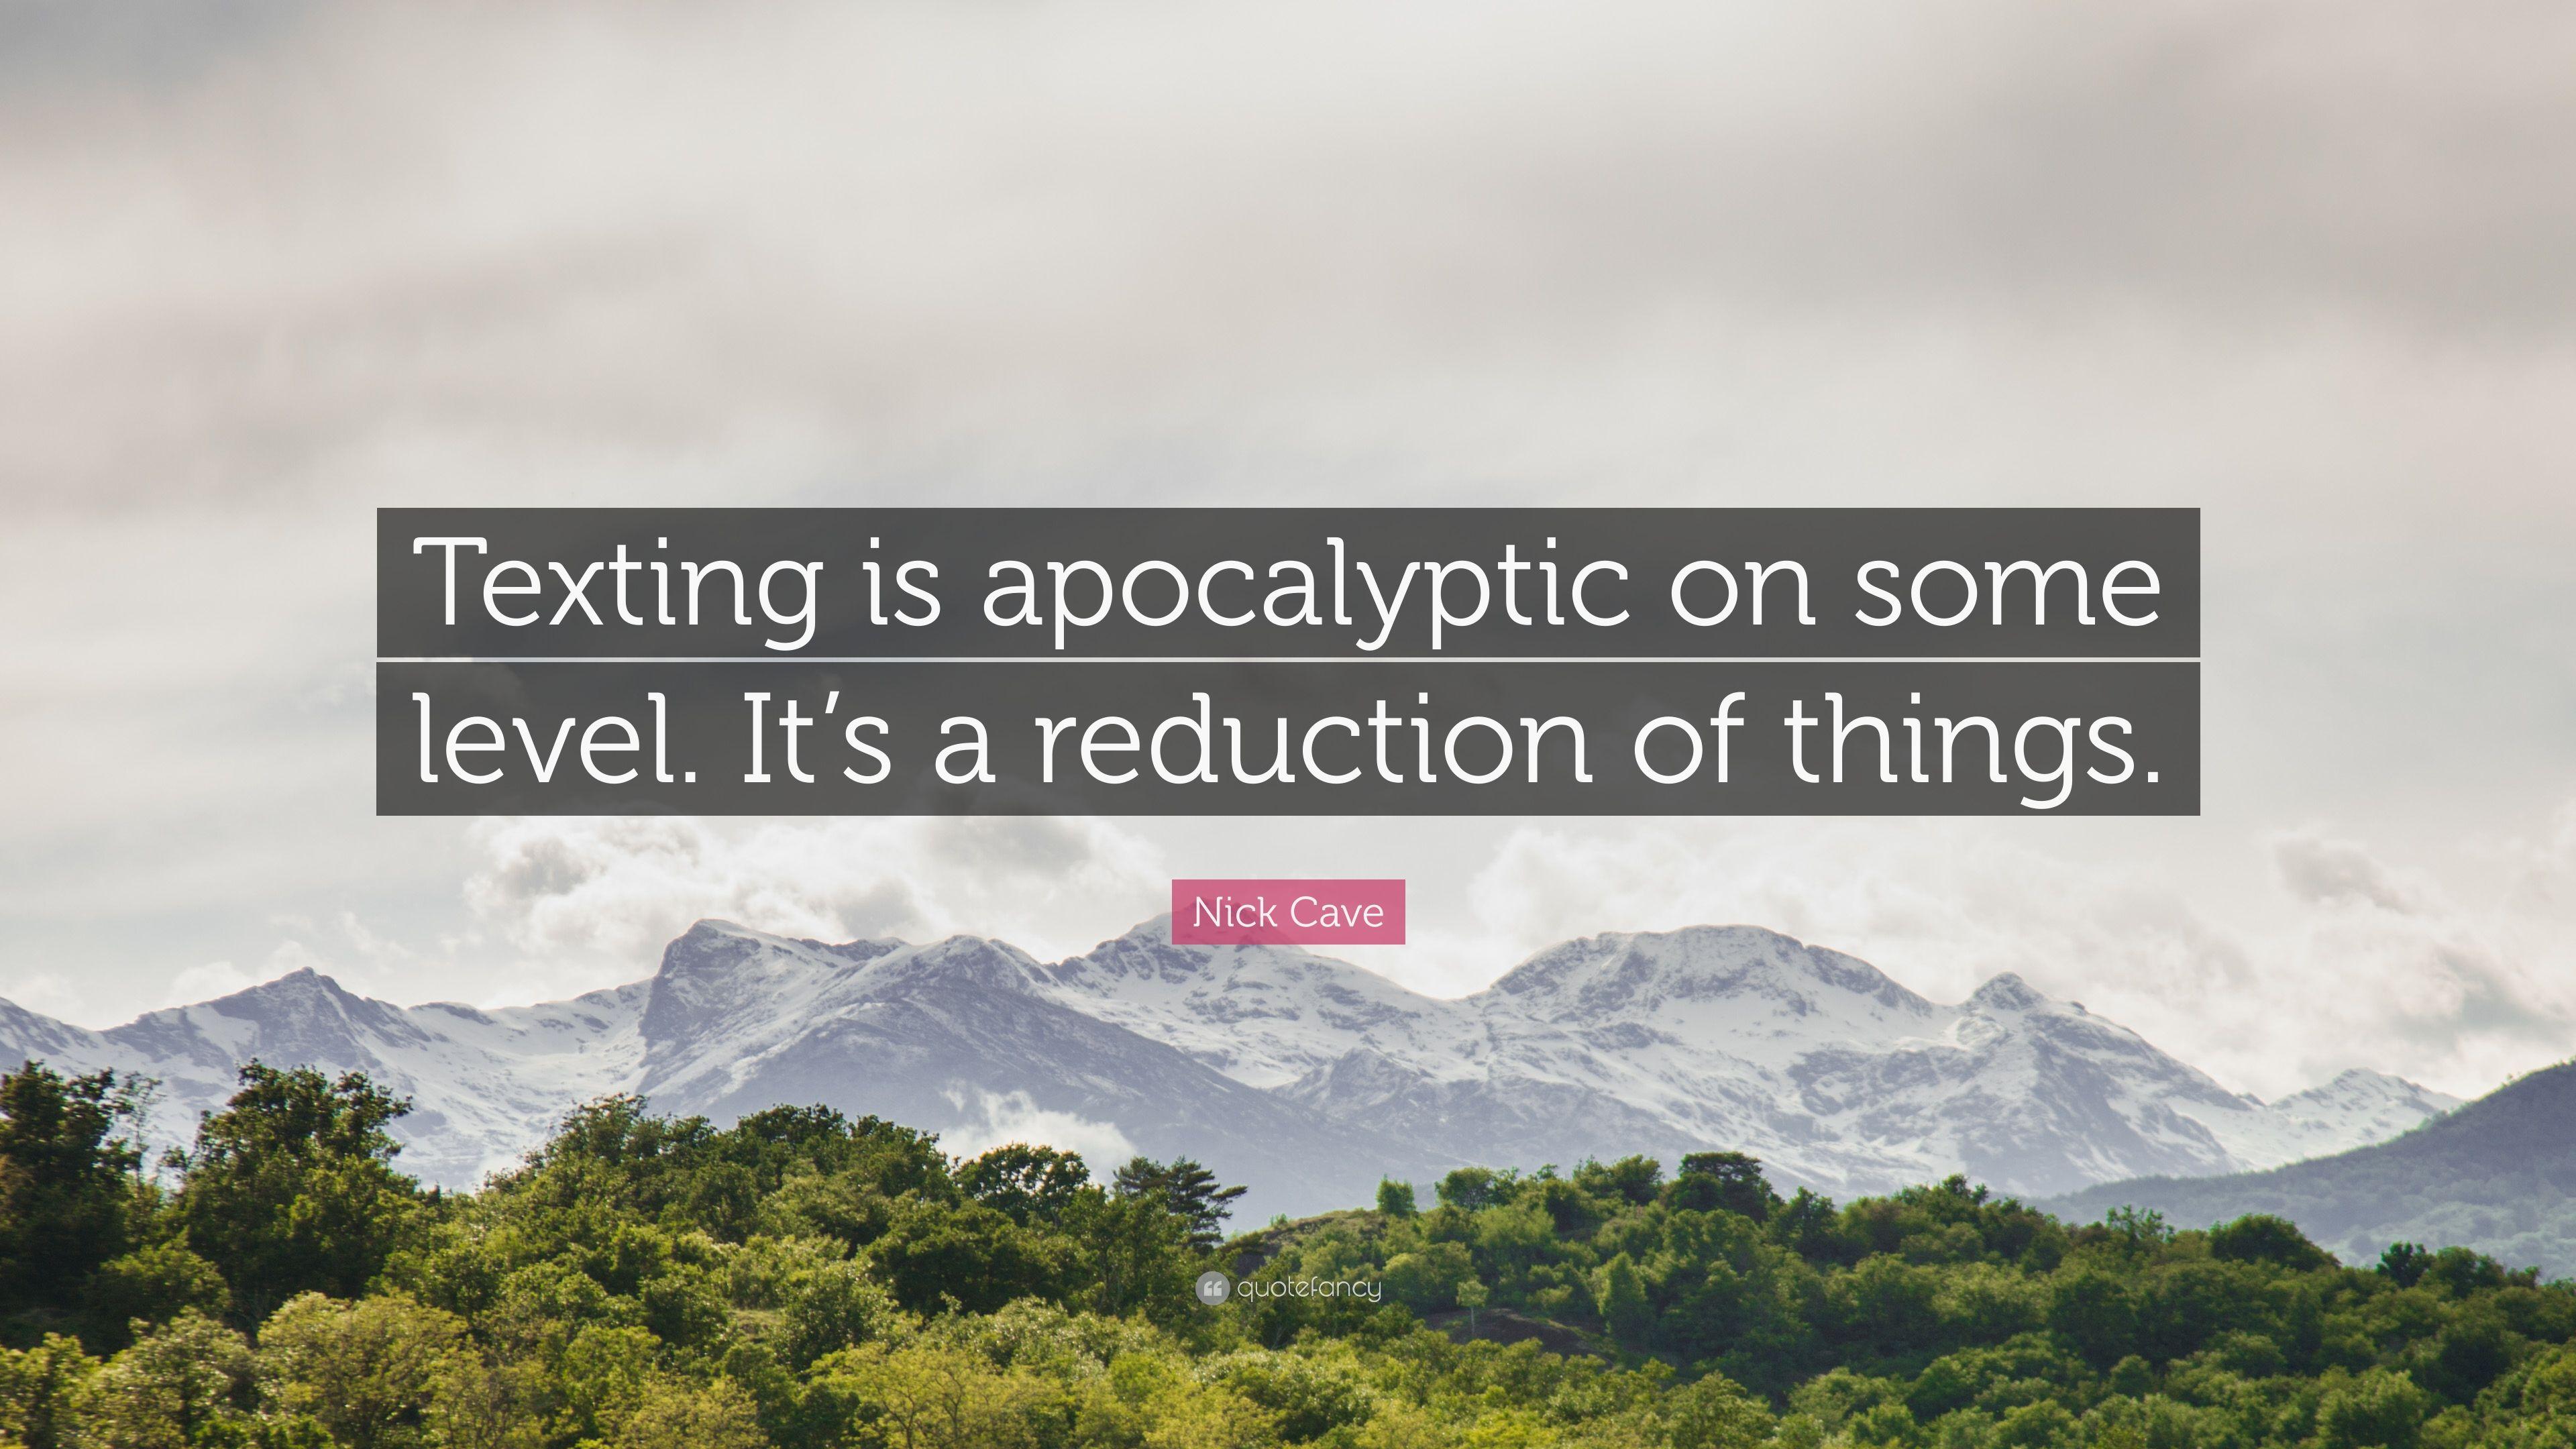 Nick Cave Quote: “Texting is apocalyptic on some level. It's a